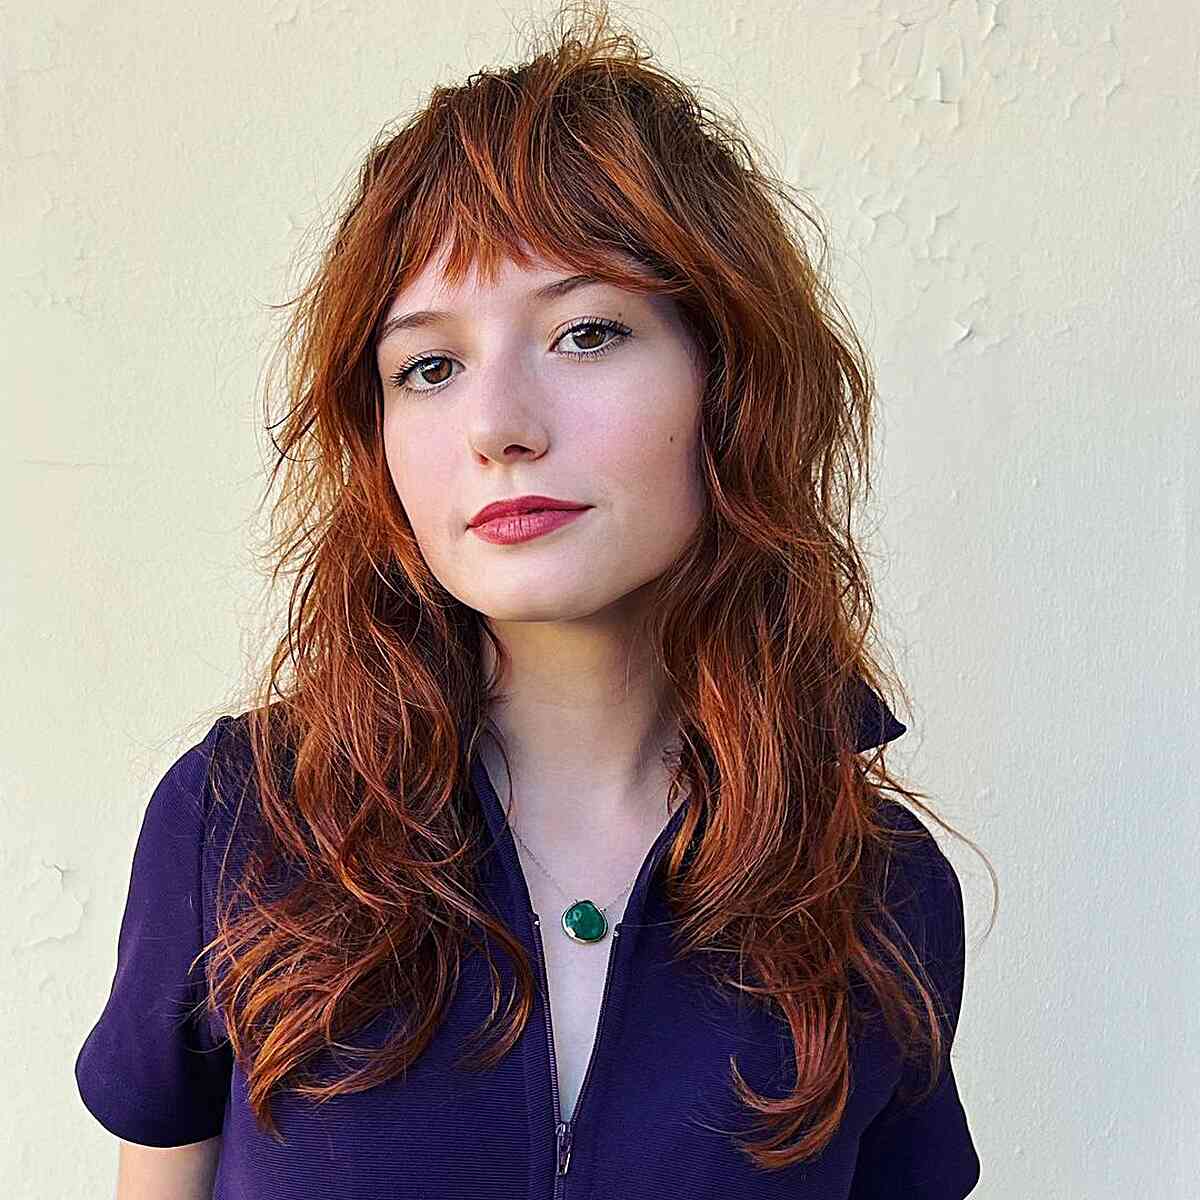 Copper Mid-Length Shaggy Wolf Cut with bangs